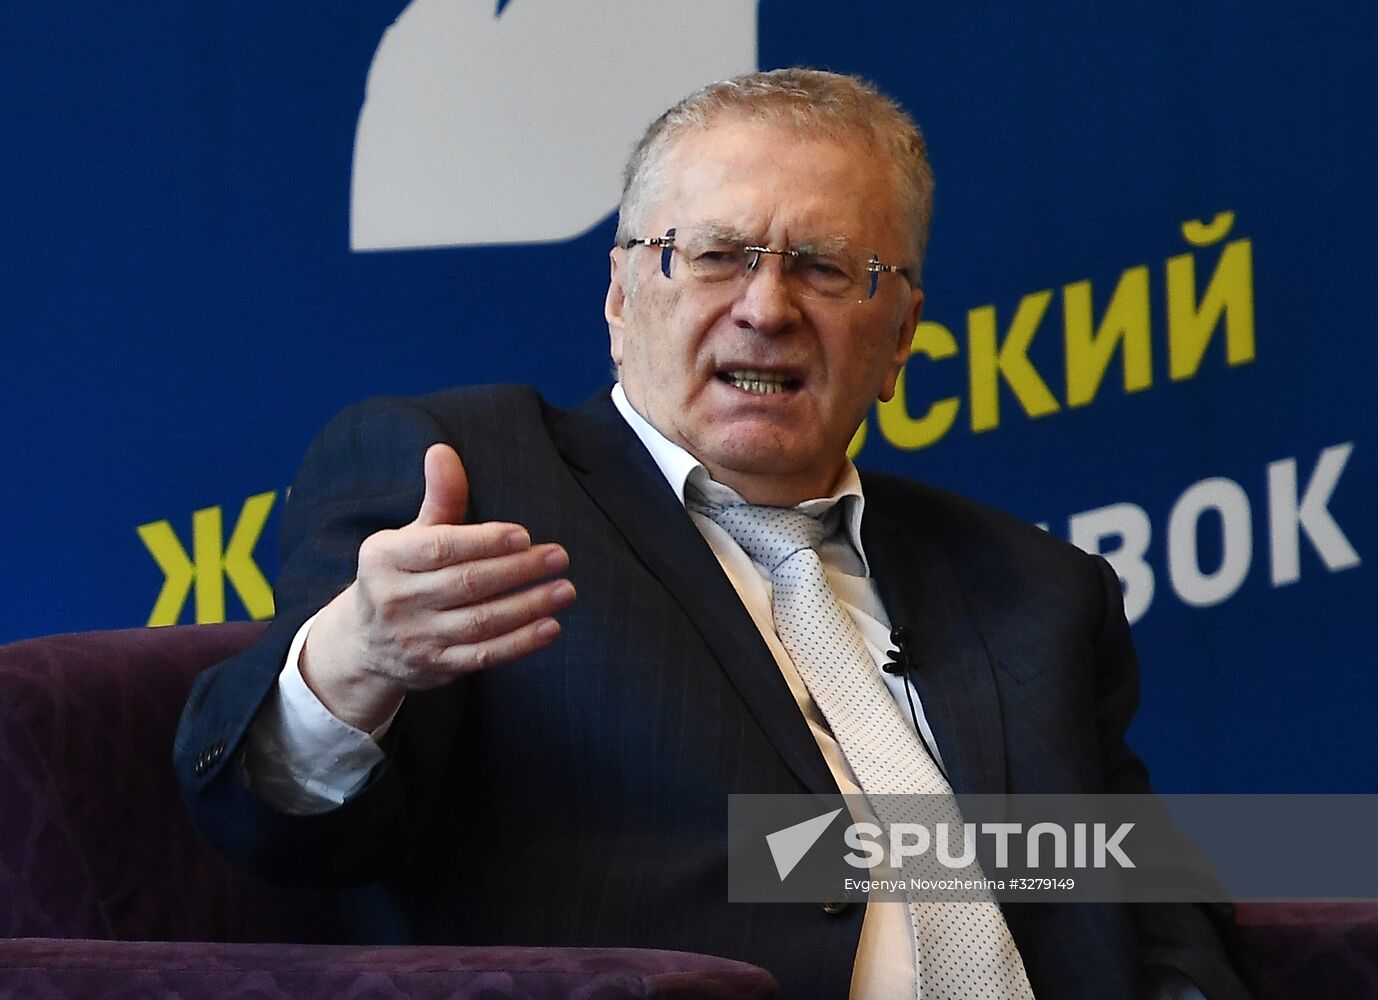 Russian presidential candidate Vladimir Zhirinovsky meets with his campaign supporters